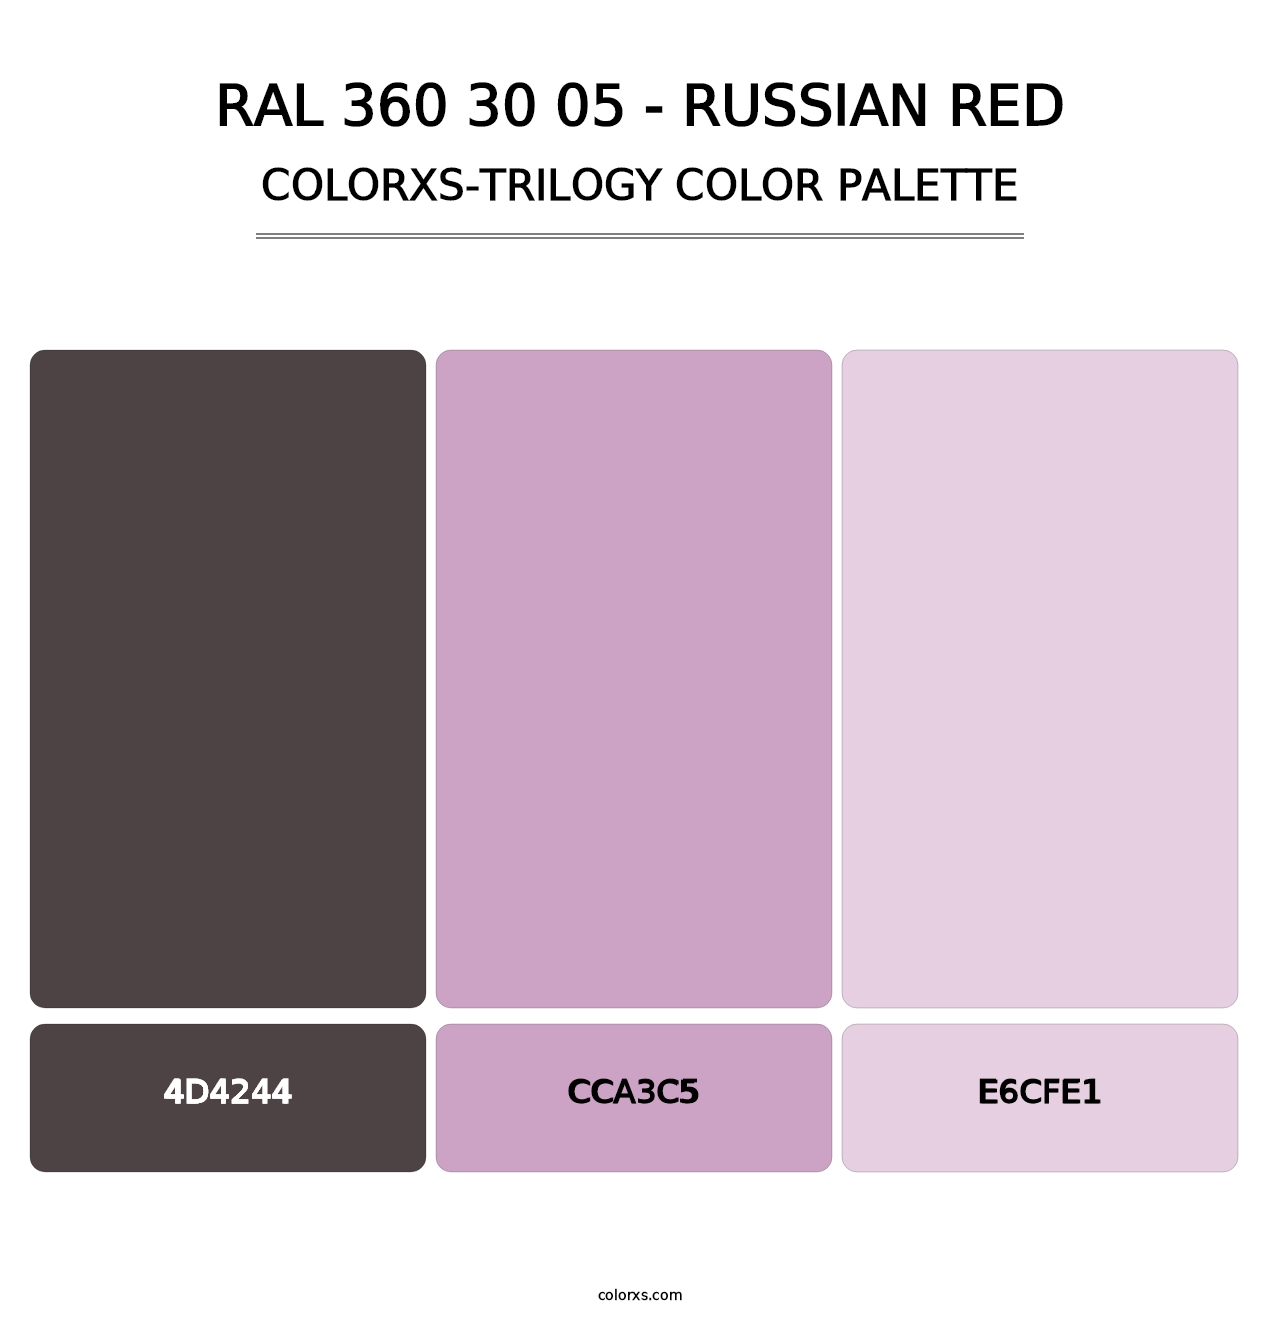 RAL 360 30 05 - Russian Red - Colorxs Trilogy Palette